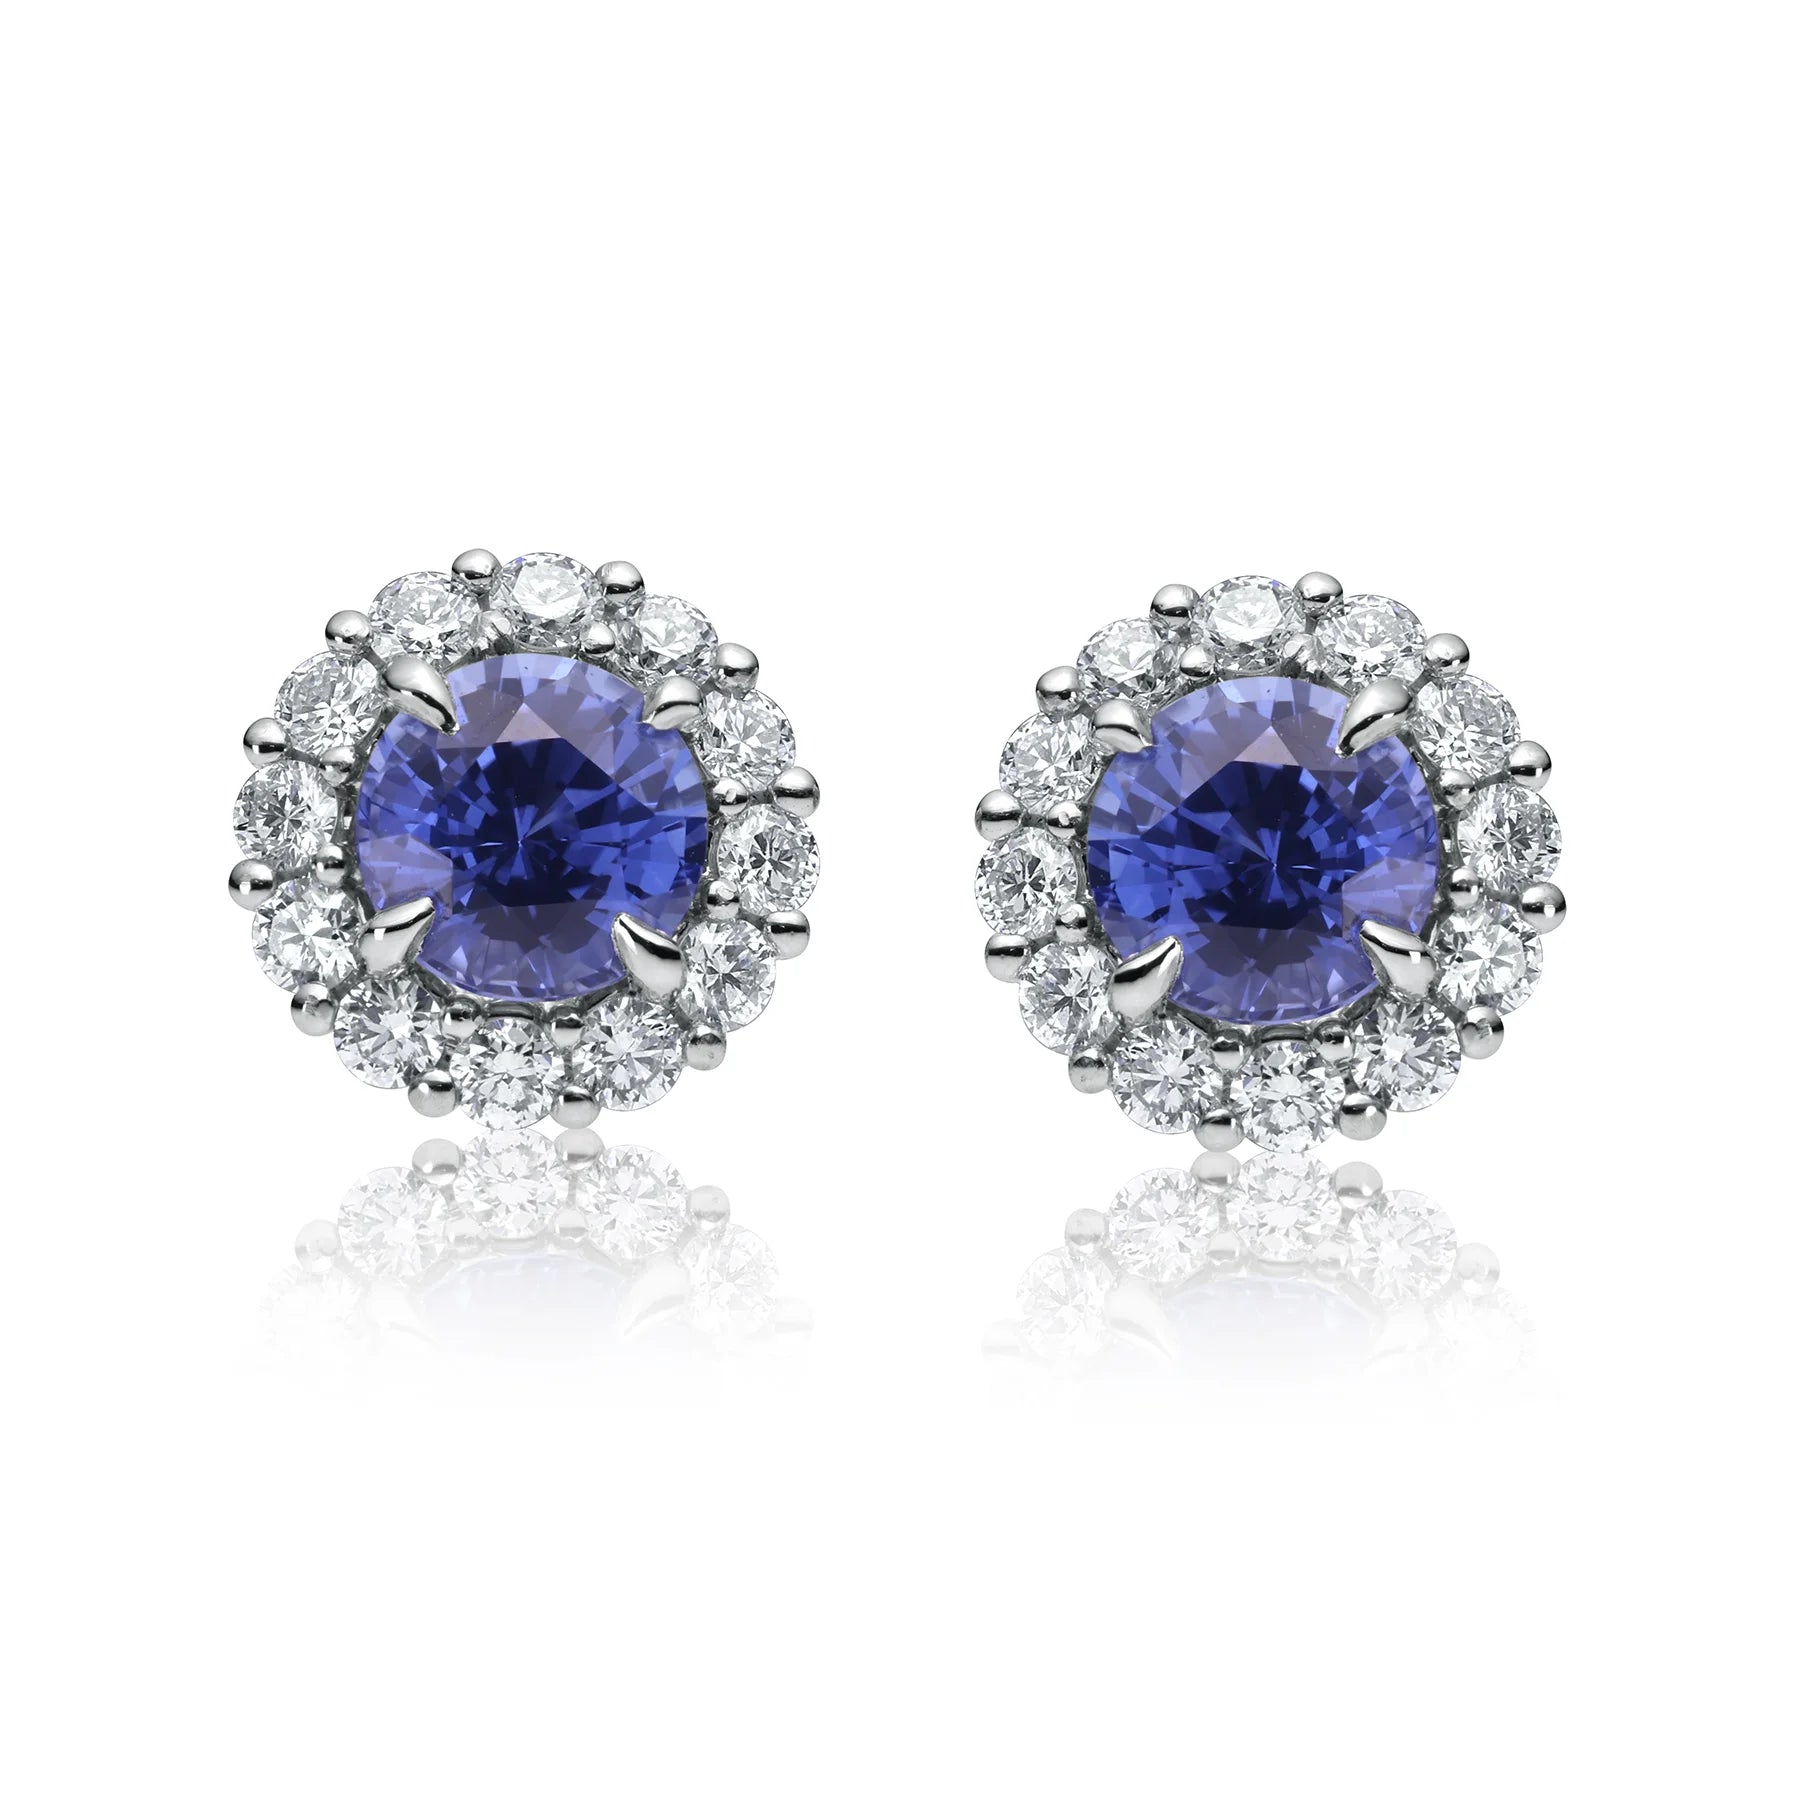 Ivy - Round Sapphire Earrings